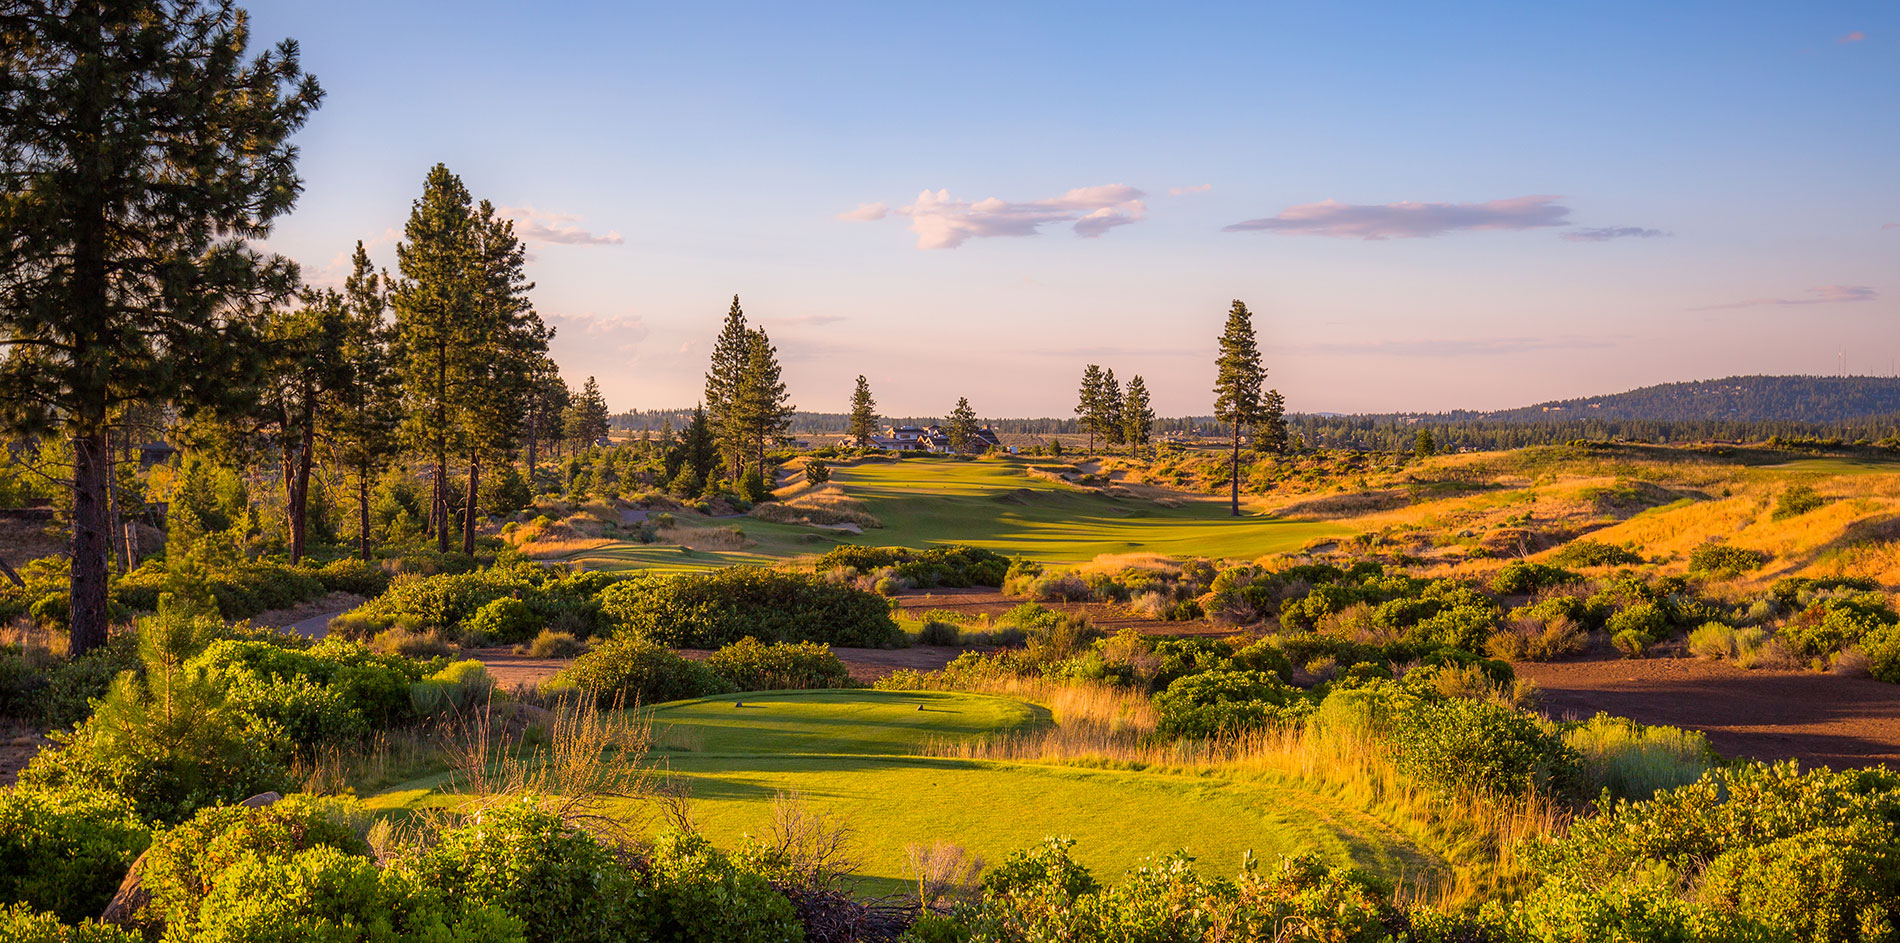 Tetherow Golf Course in Bend